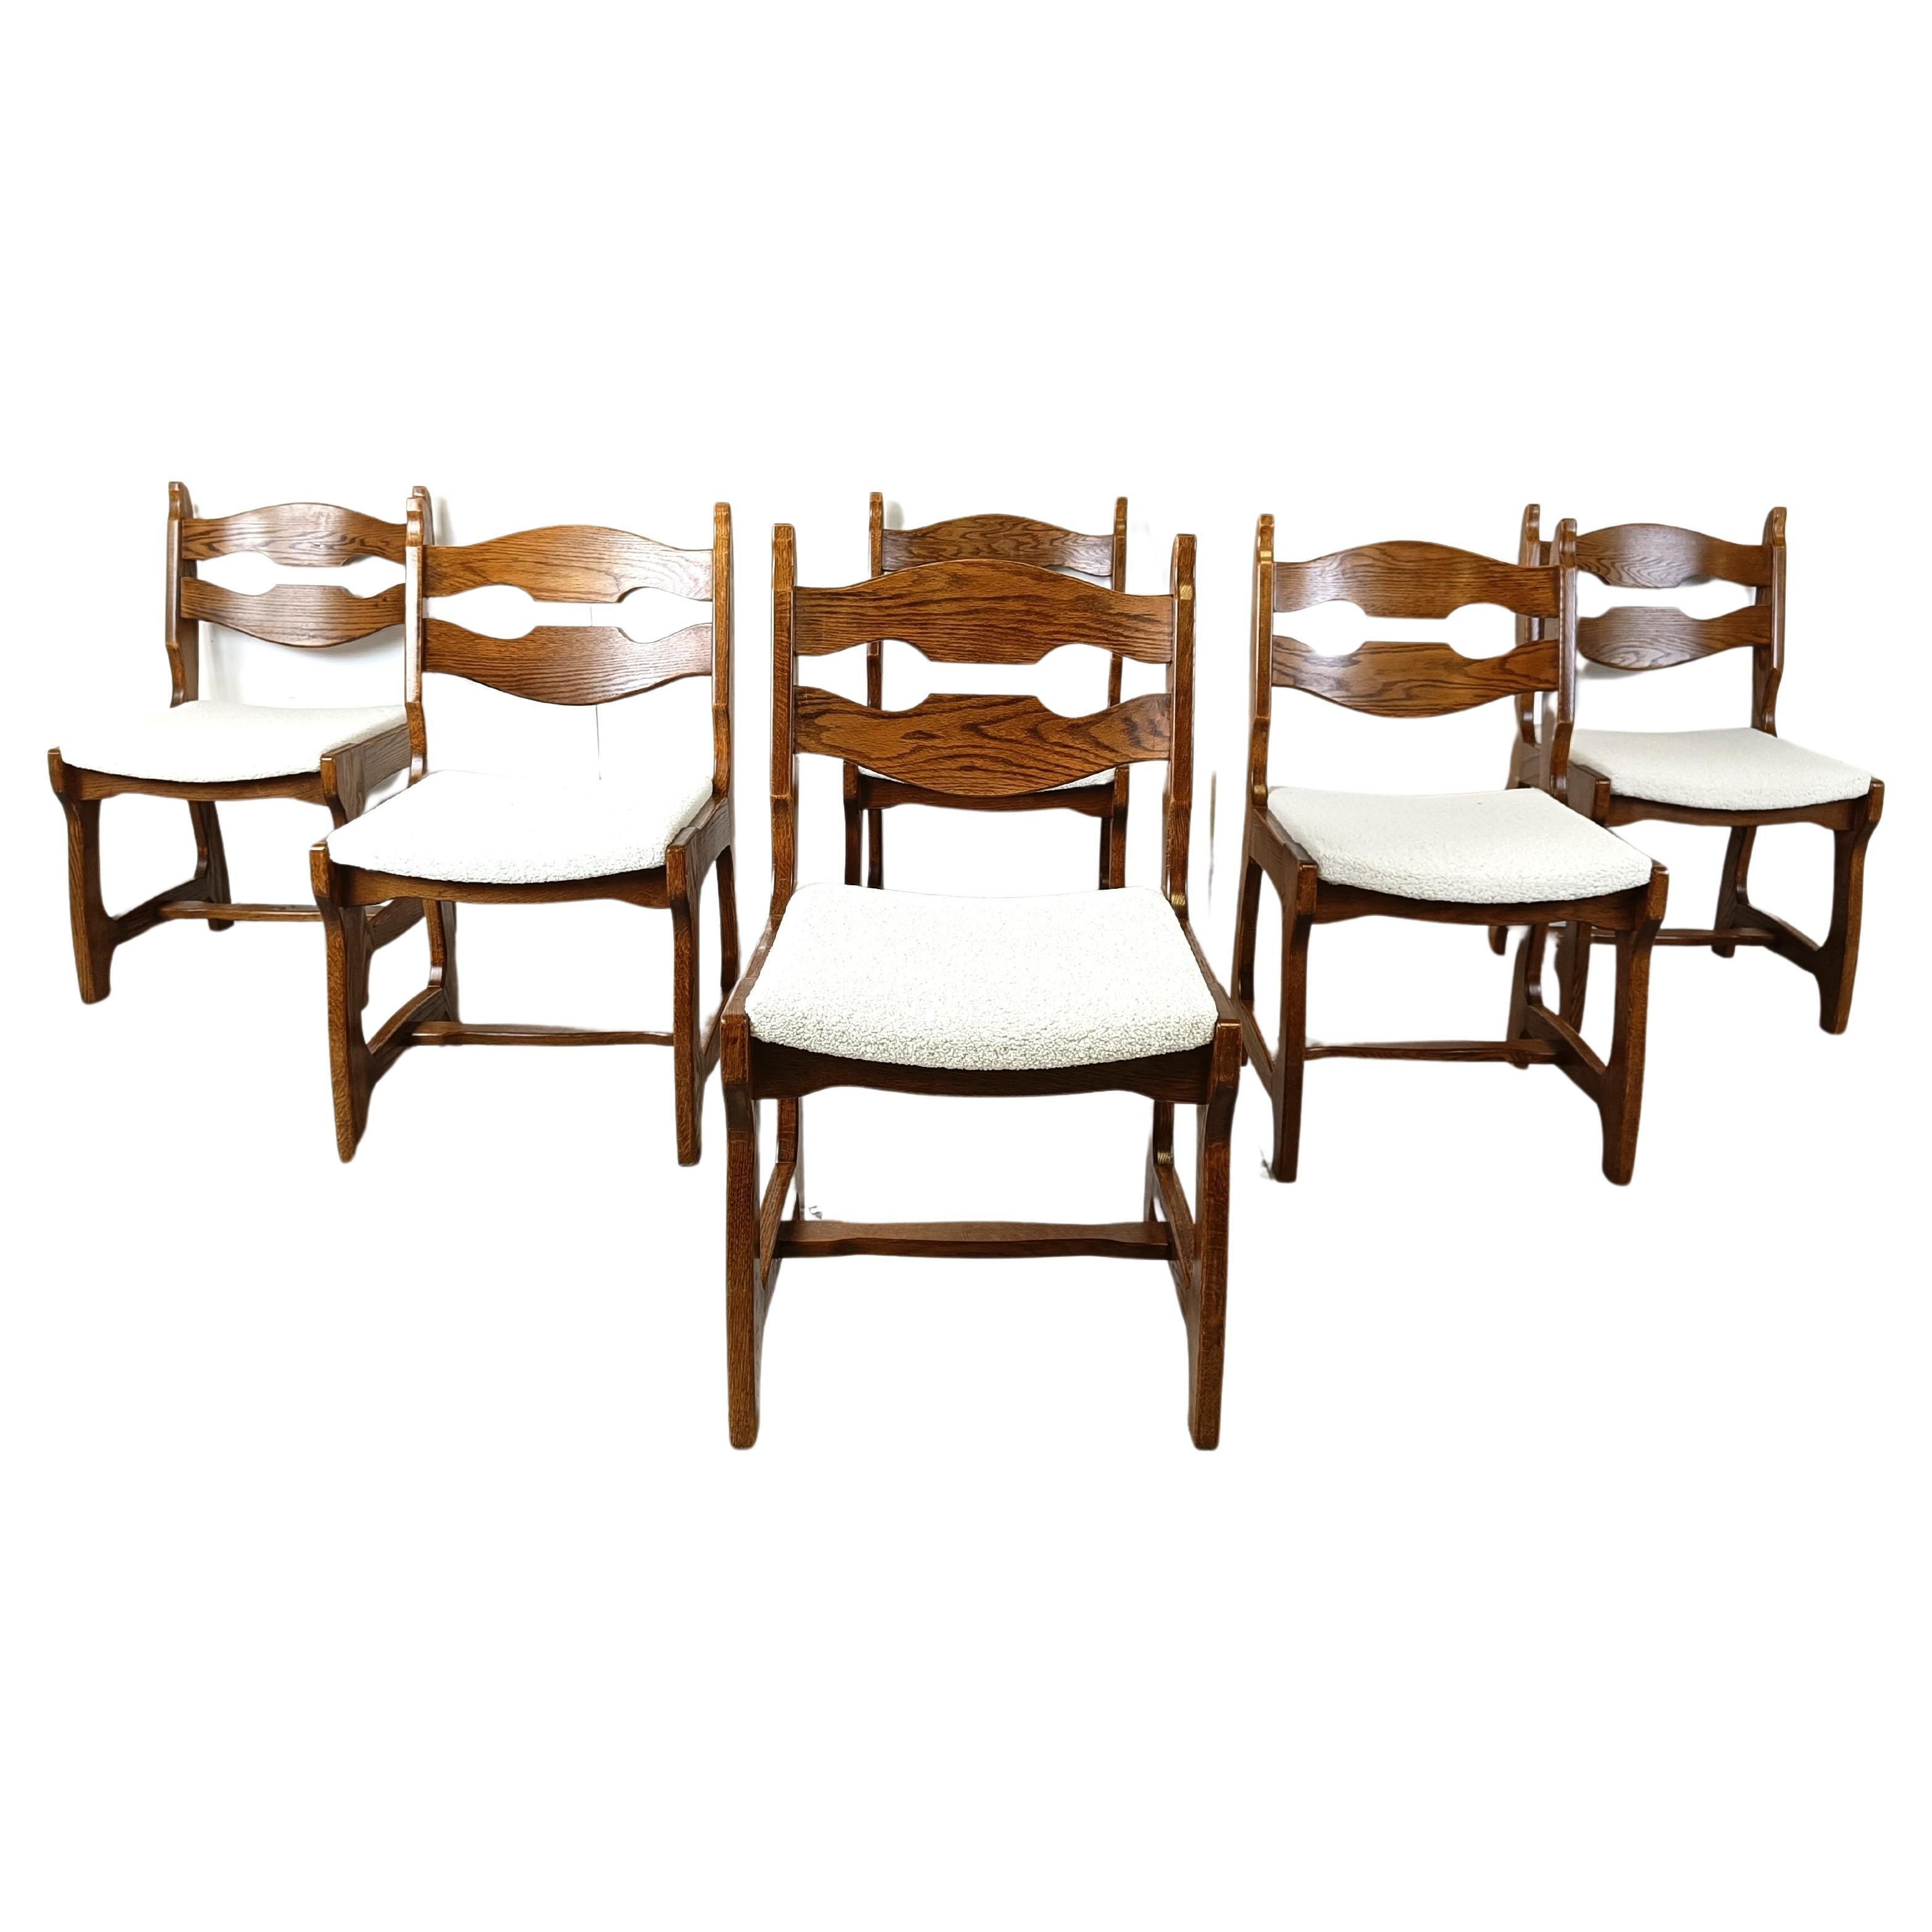 Vintage brutalist dining chairs, set of 6 - 1960s  For Sale